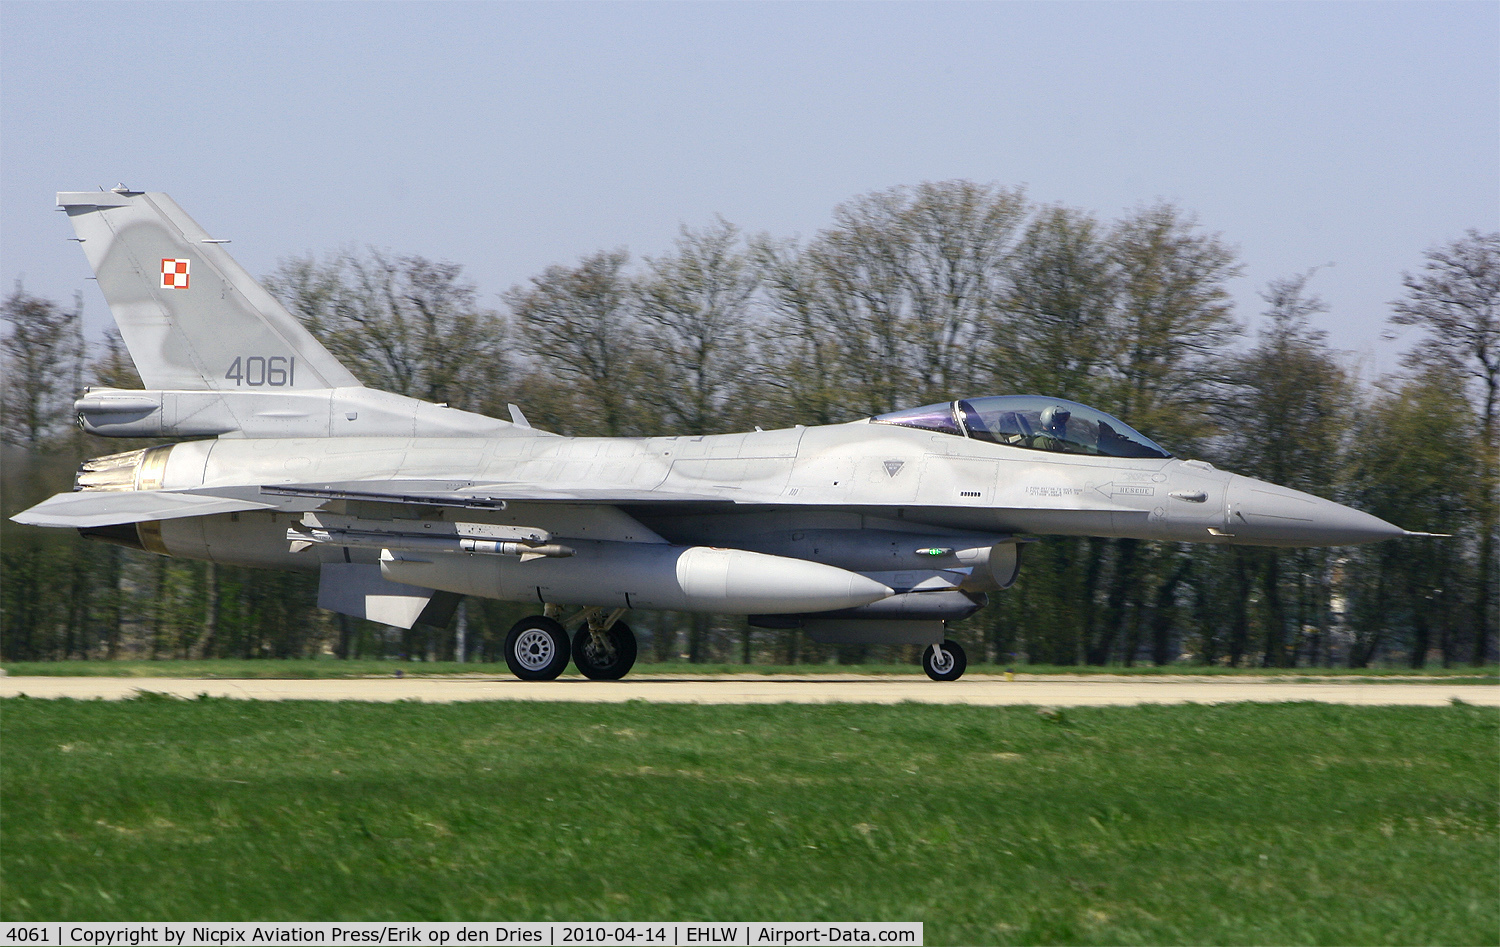 4061, 2007 General Dynamics F-16C Fighting Falcon C/N JC-22, Poland AF F-16C 4061 in the brakes, only seconds from starting its' take-off run at Leeuwrden AB, The Netherlands, during Frisian Flag 2010